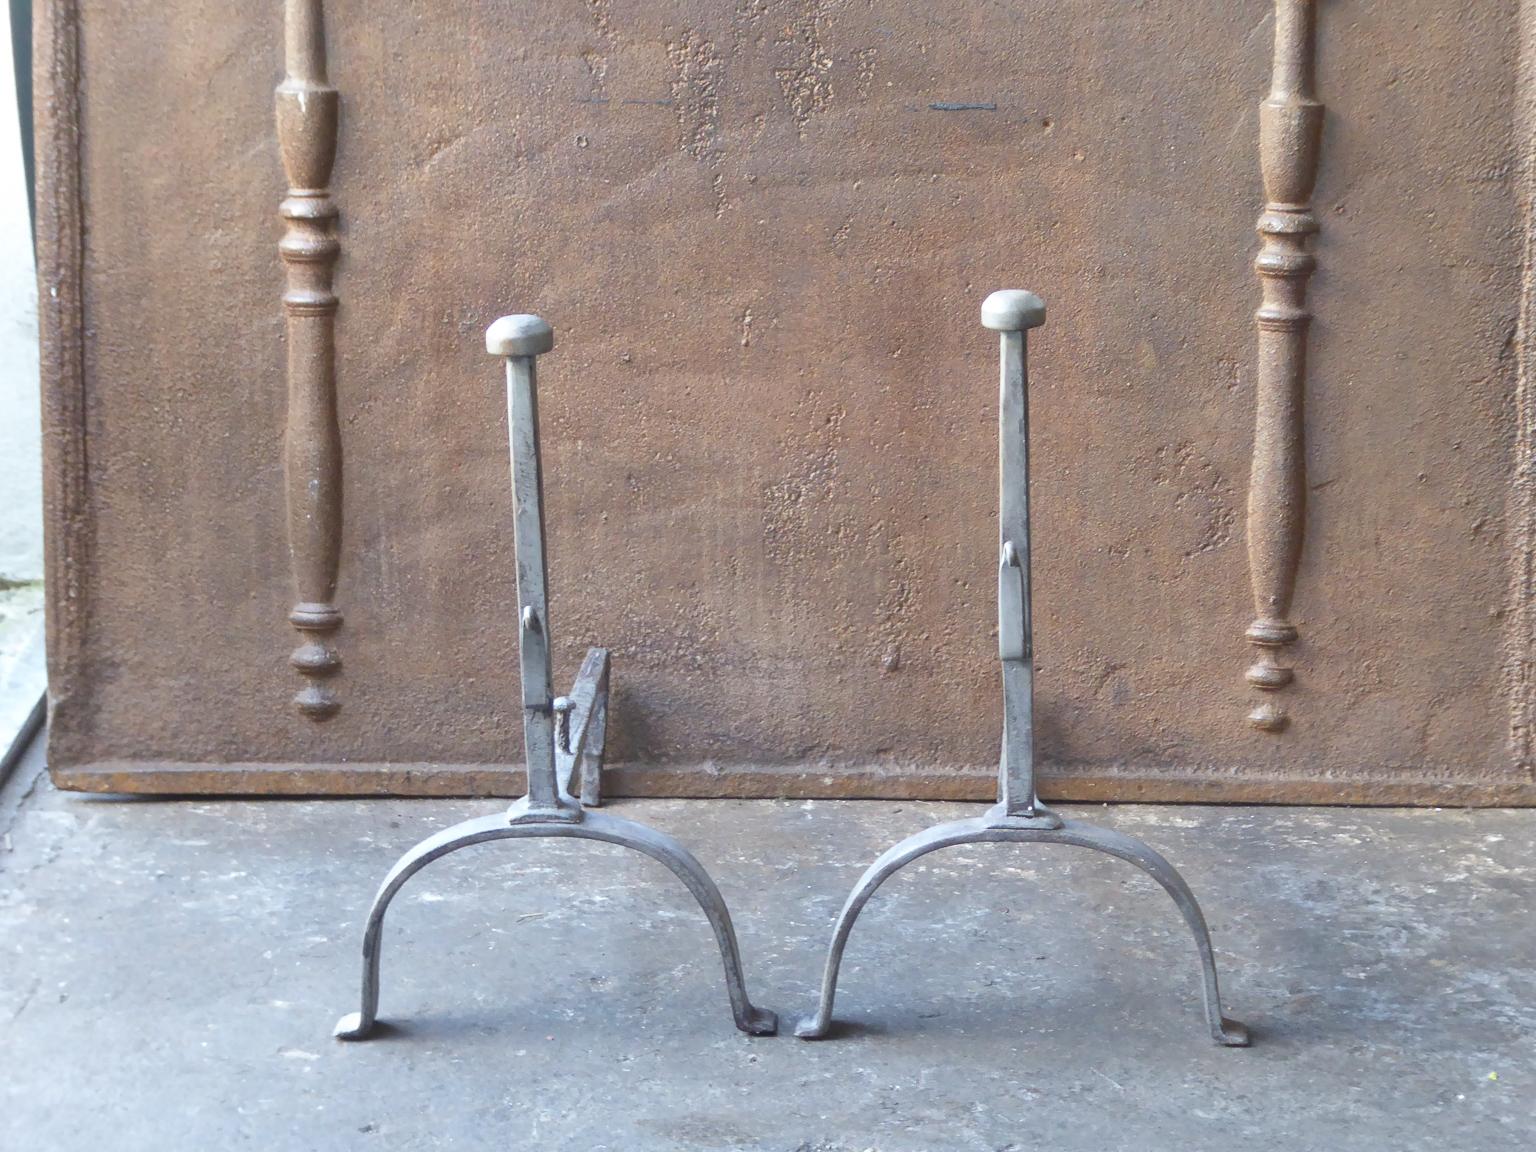 19th century French Napoleon III andirons. The andirons are made or wrought iron and have spit hooks to grill food.







